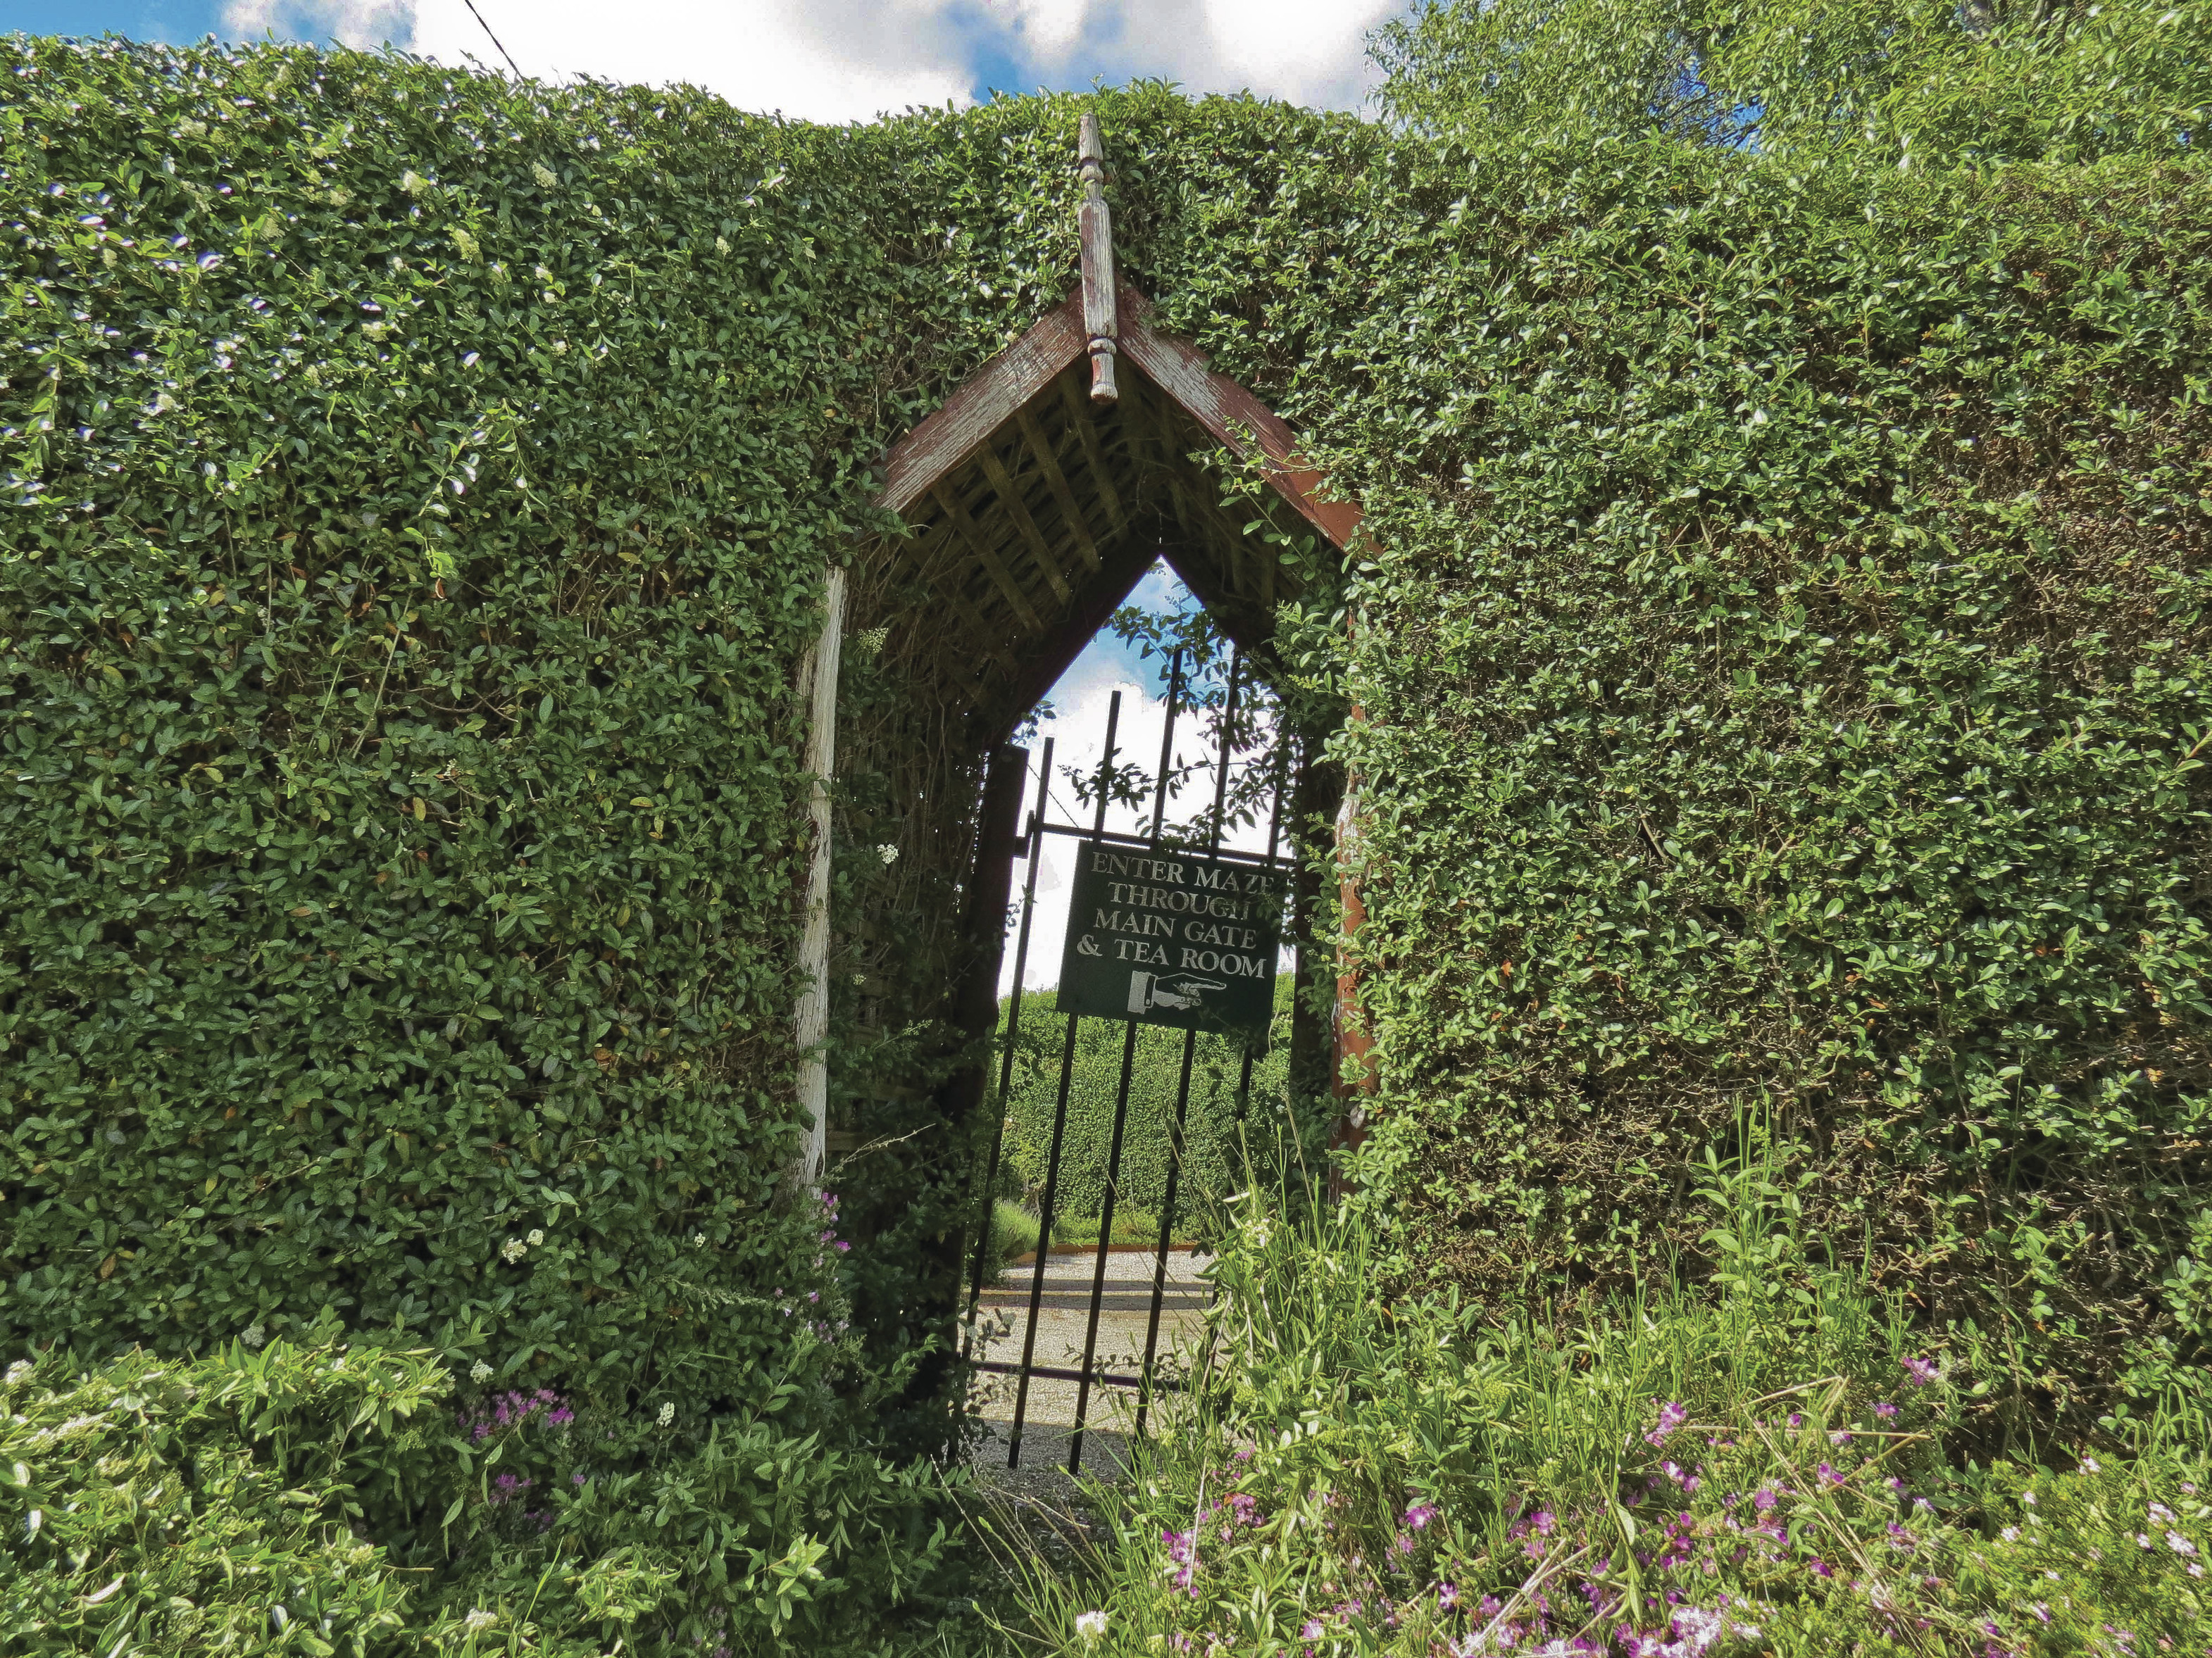 An entrance door to the neatly clipped traditional hedge maze at Westbury Maze and Tea Room.